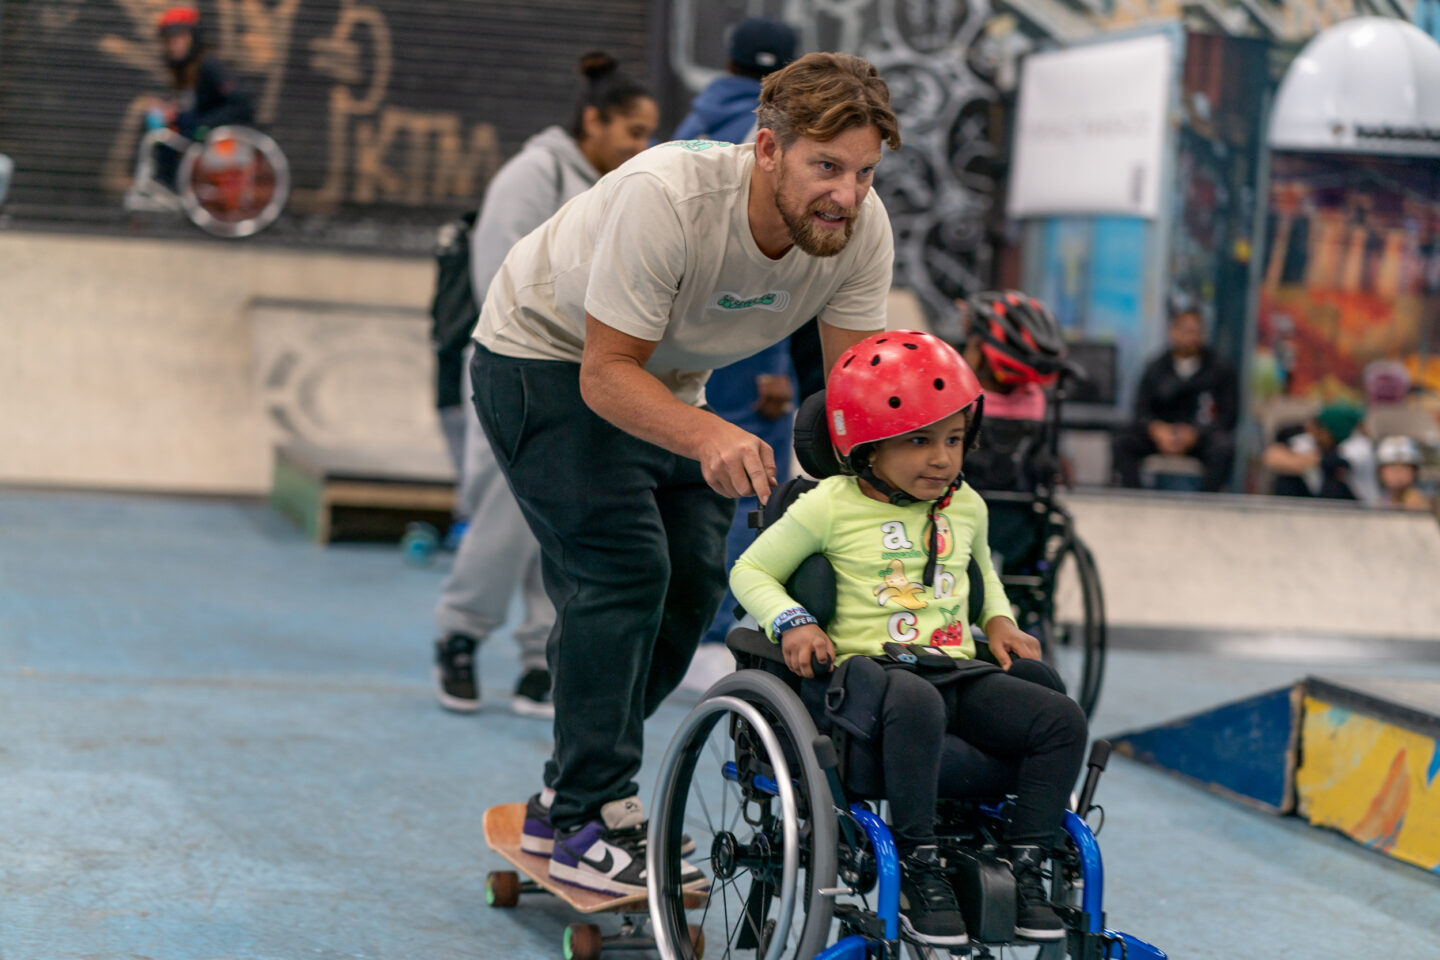 A person on a skateboard pushes a child in a wheelchair at a skatepark